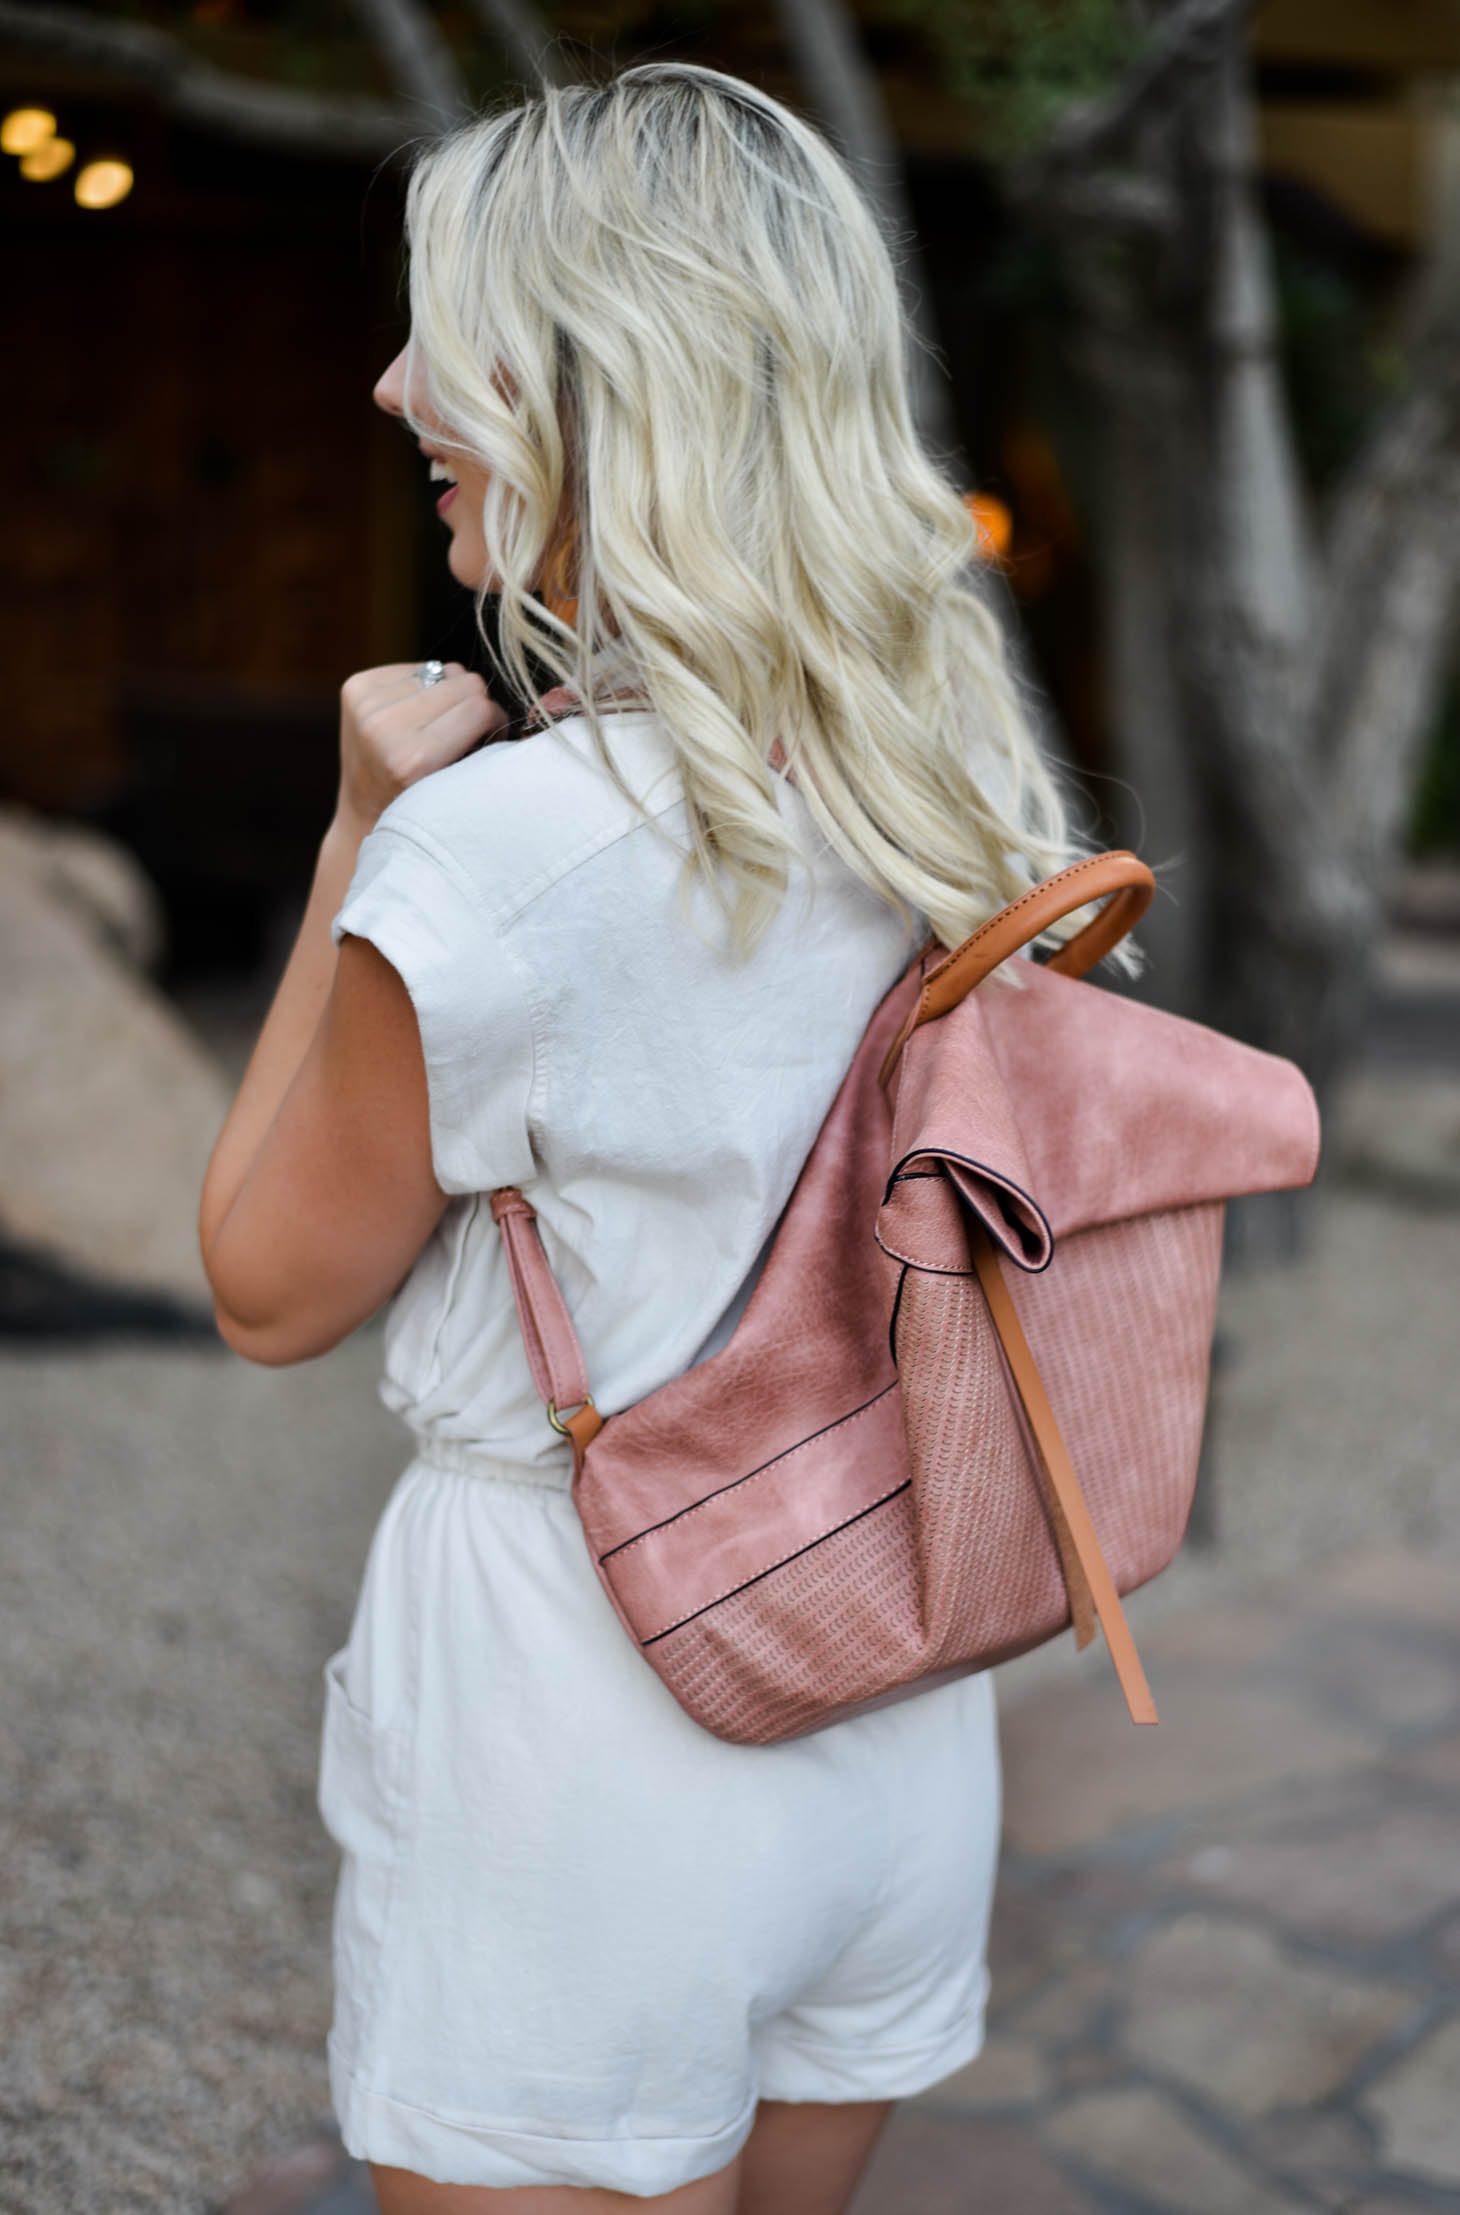 Erin Elizabeth of Wink and a Twirl in this Vici Dolls Tie Romper and Backpack Summer Style